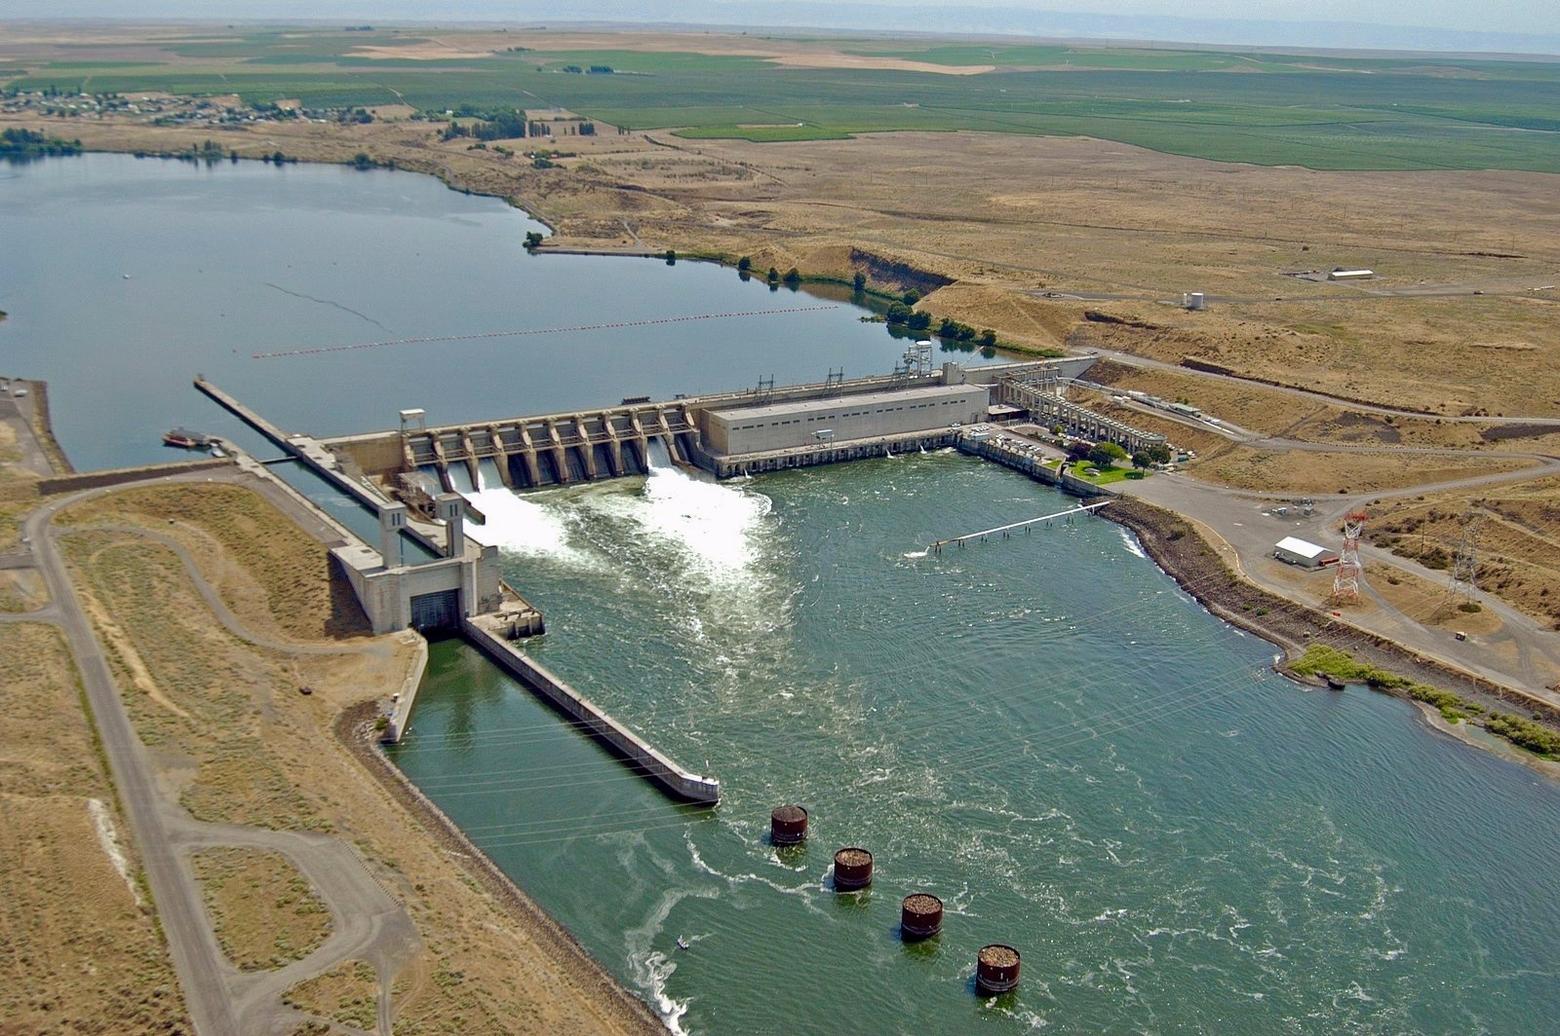 Ice Harbor Dam on the Lower Snake River. With salmon and steelhead runs teetering on the edge of total collapse, is the era of denial over the devastating impacts of dams on fish finally over?  Federal policies allow the killing of upwards of 90 percent of the salmon and steelhead spawning runs.  Fish conservationists may have found an unlikely hero.